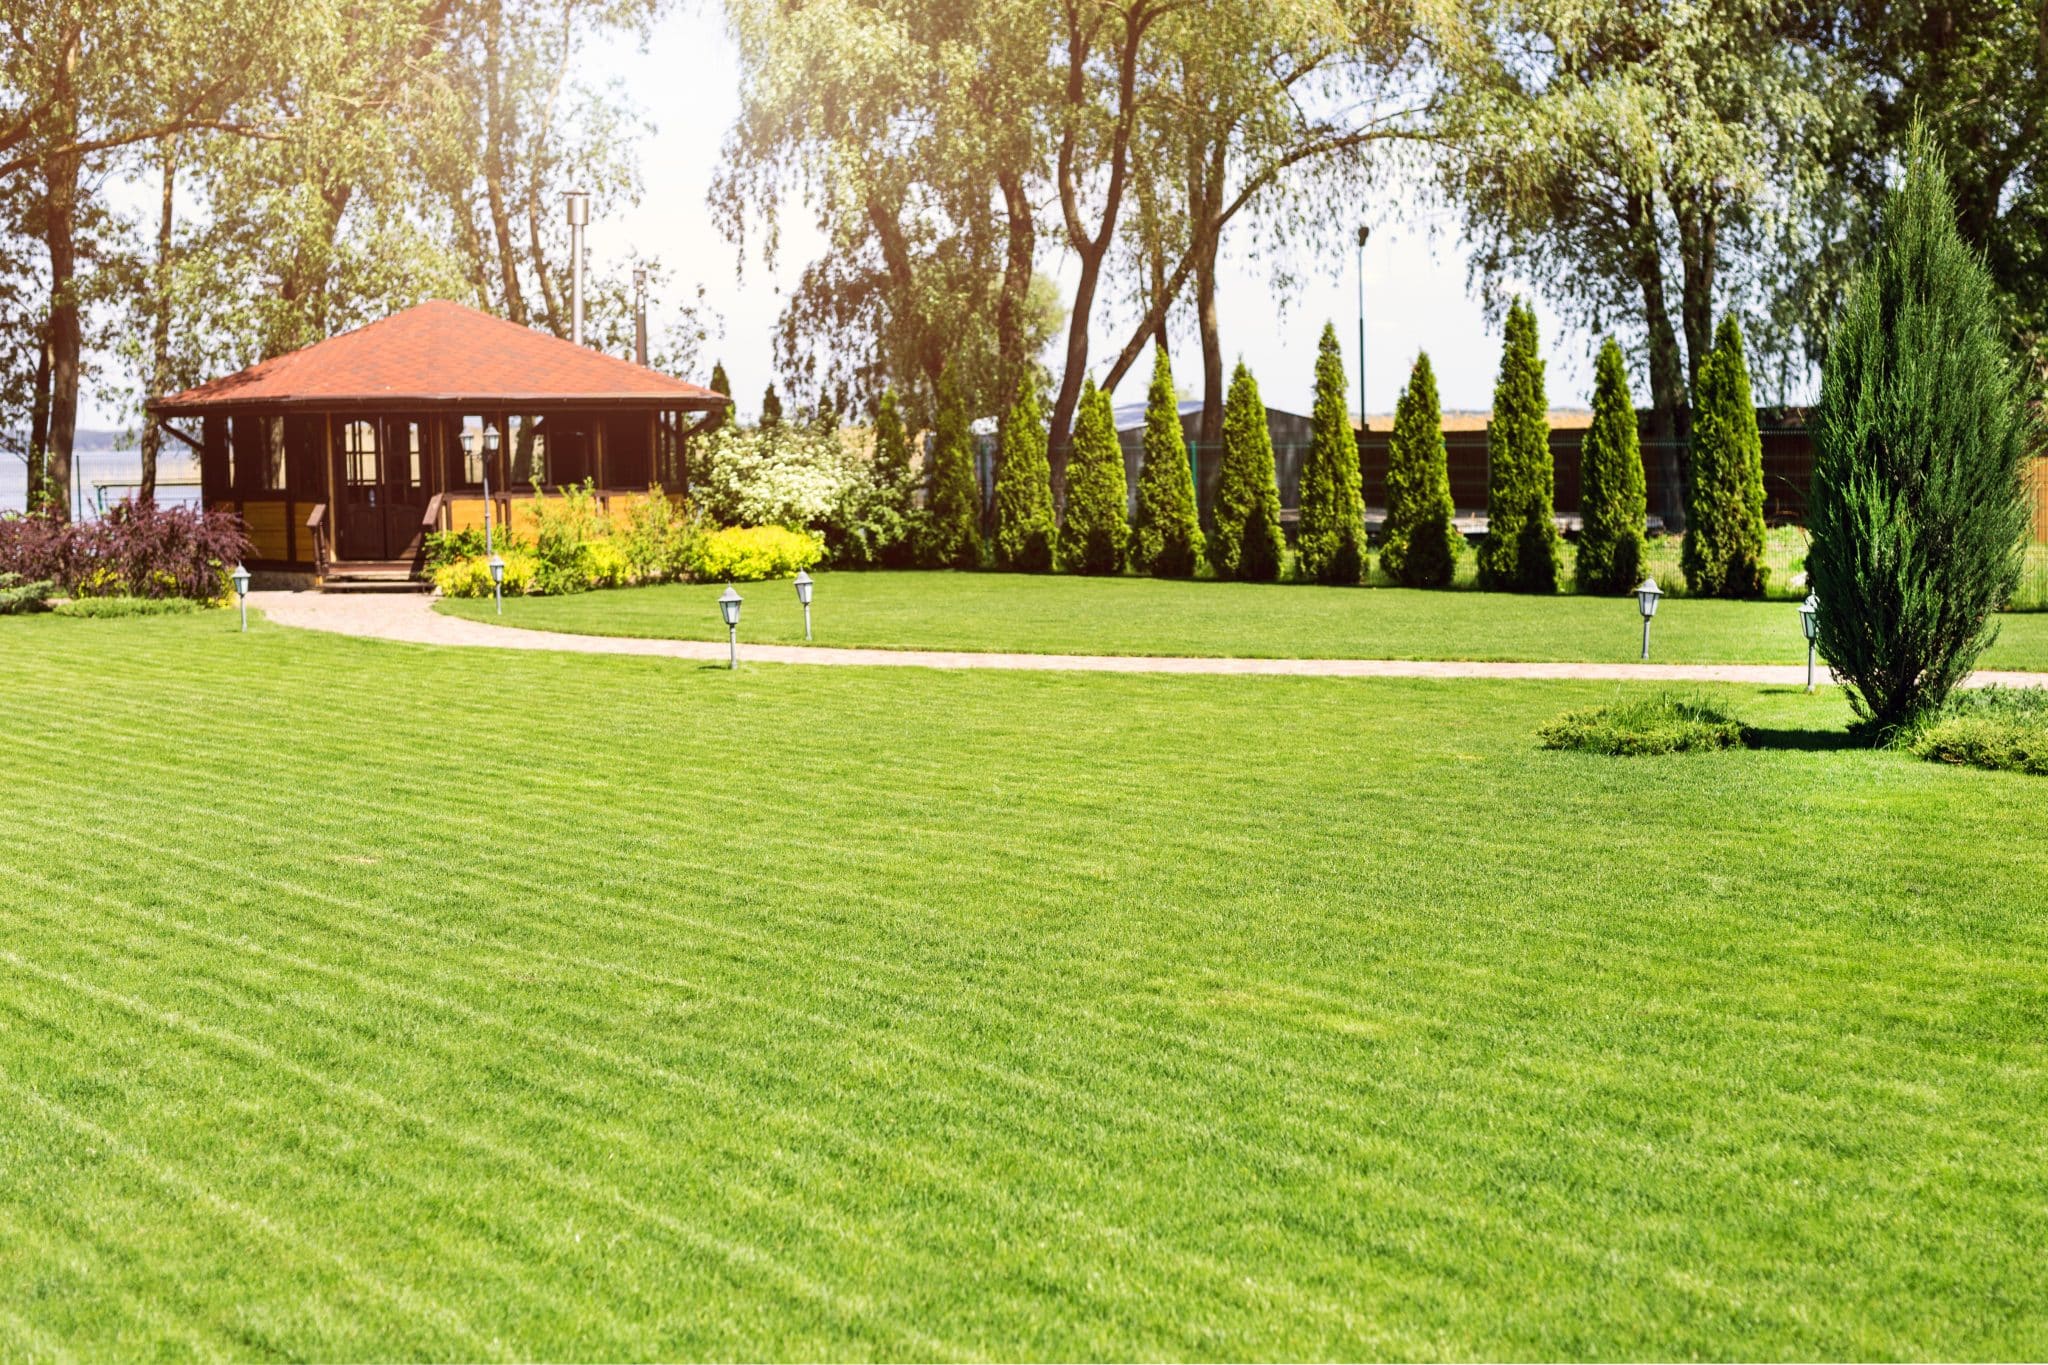 landscaping in salem, landscaping company in salem, salem landscaping company